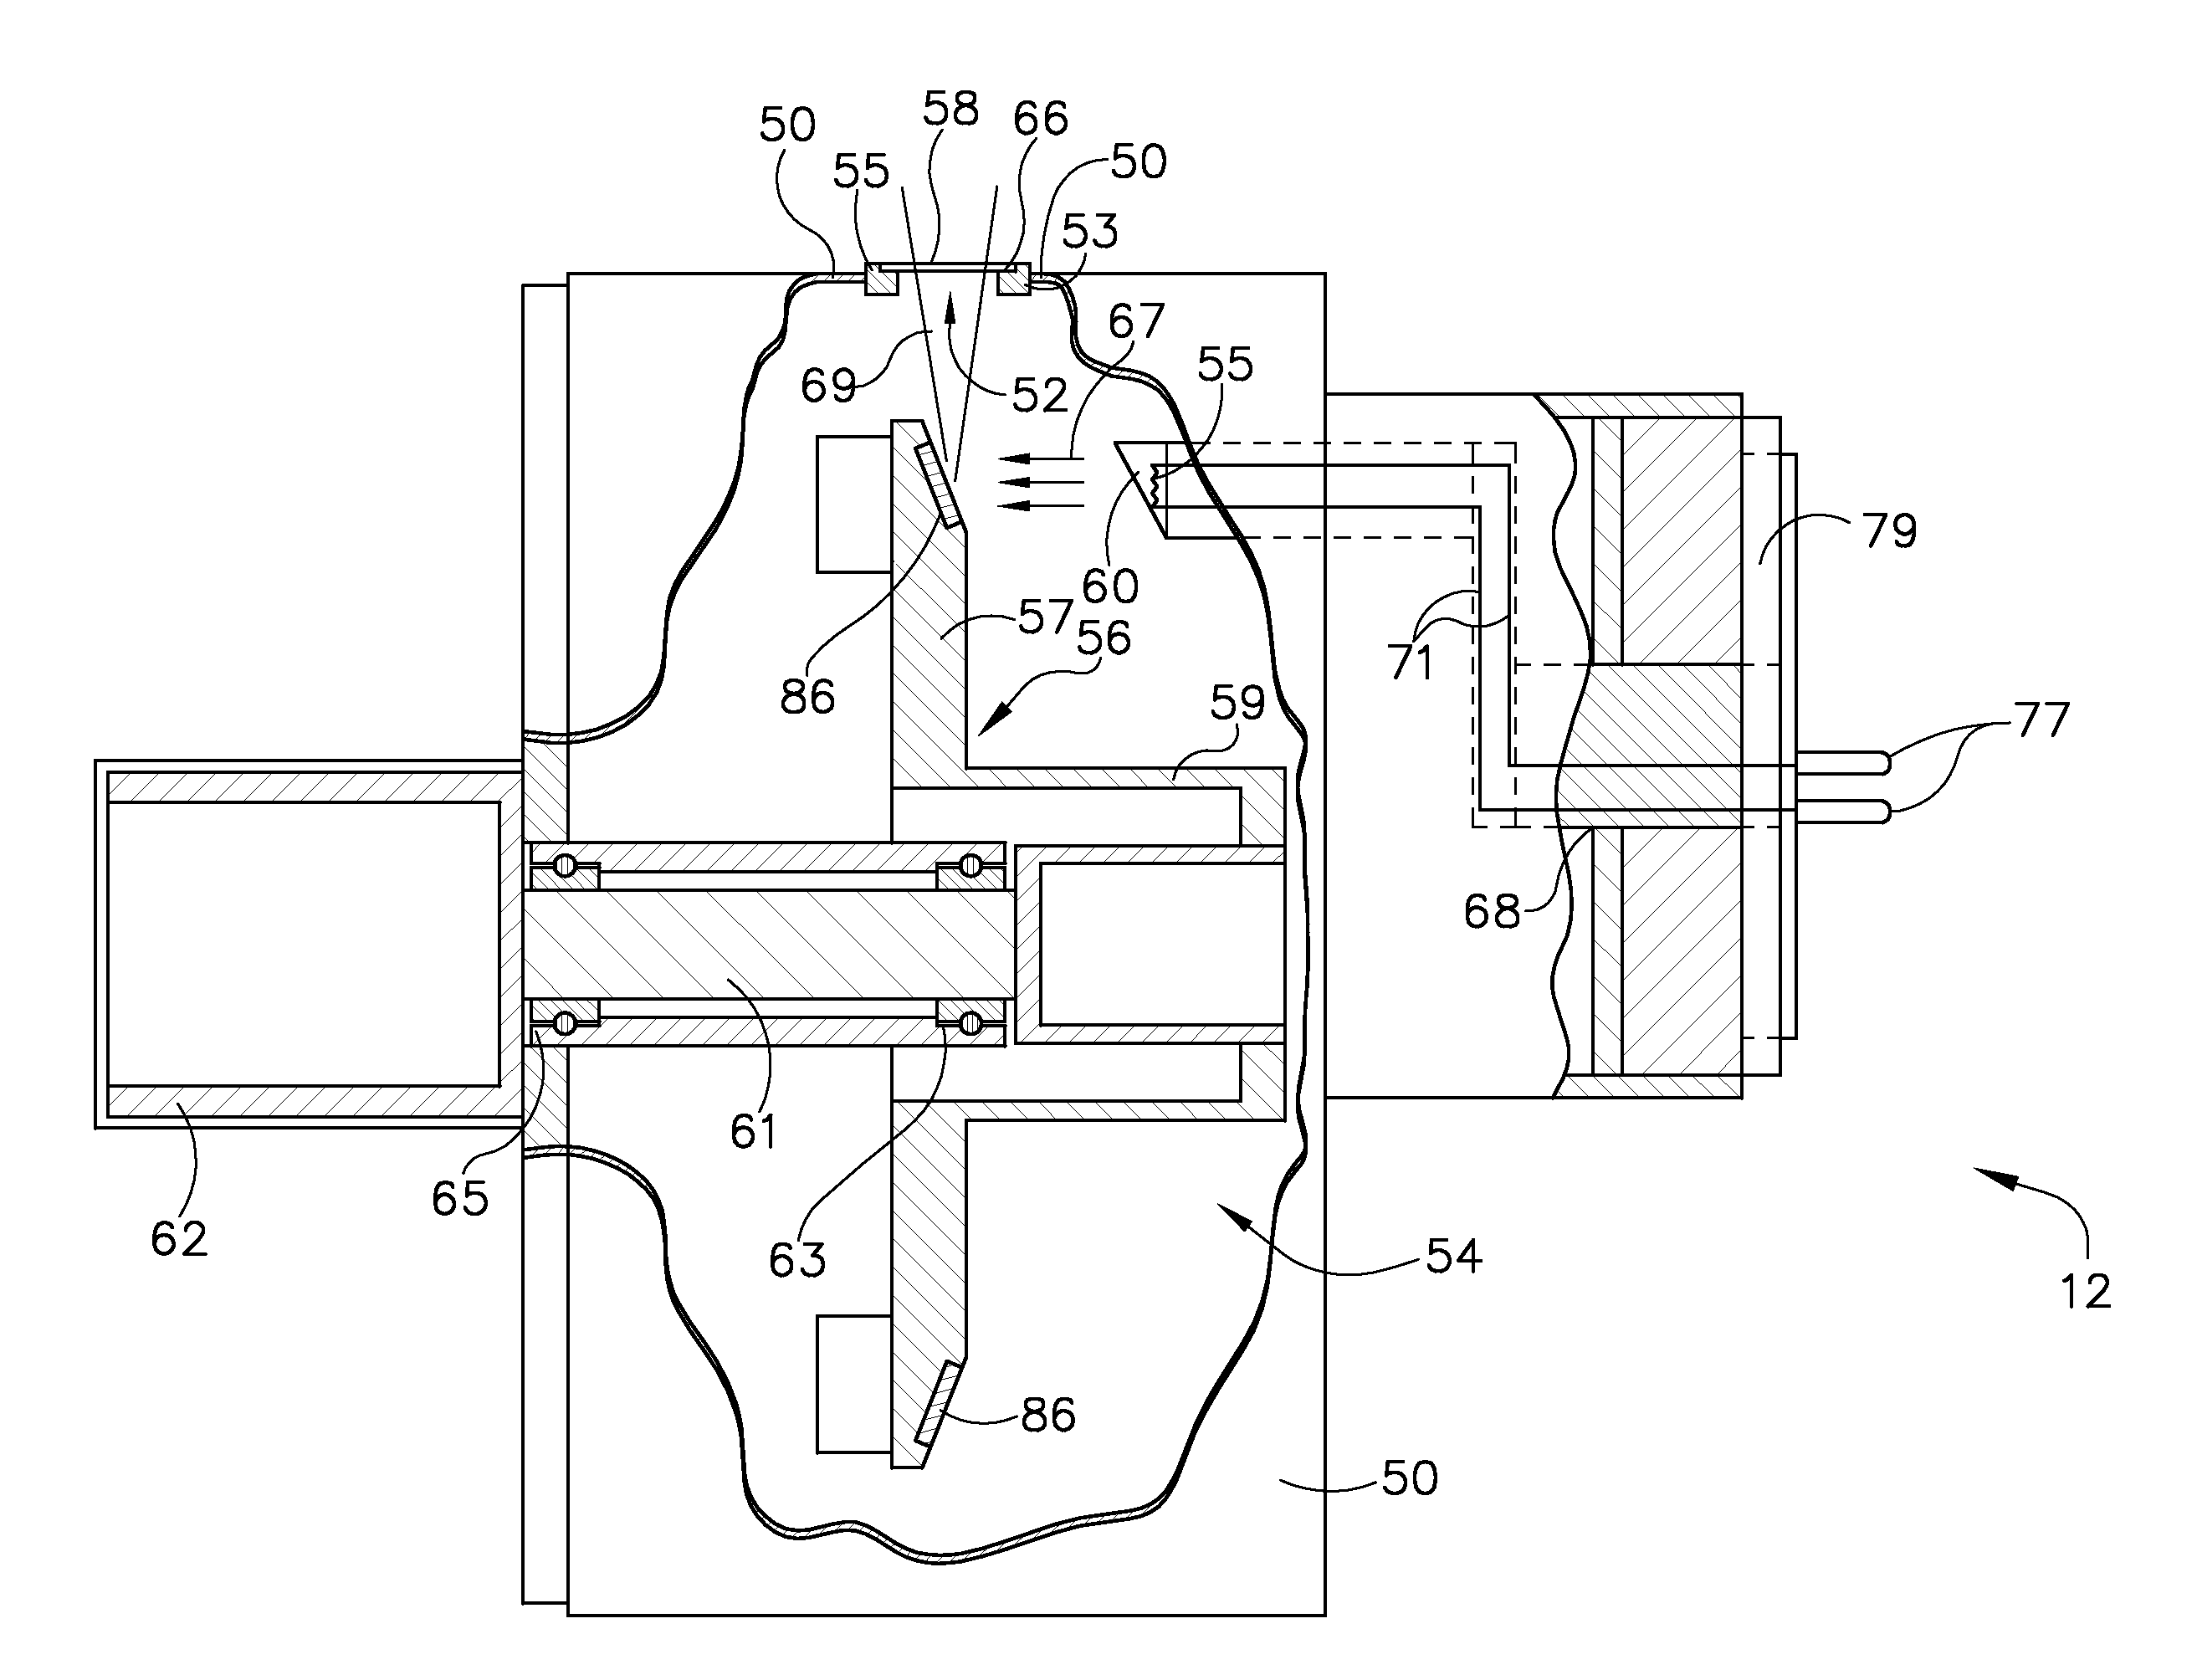 Braze assembly with beryllium diffusion barrier and method of making same